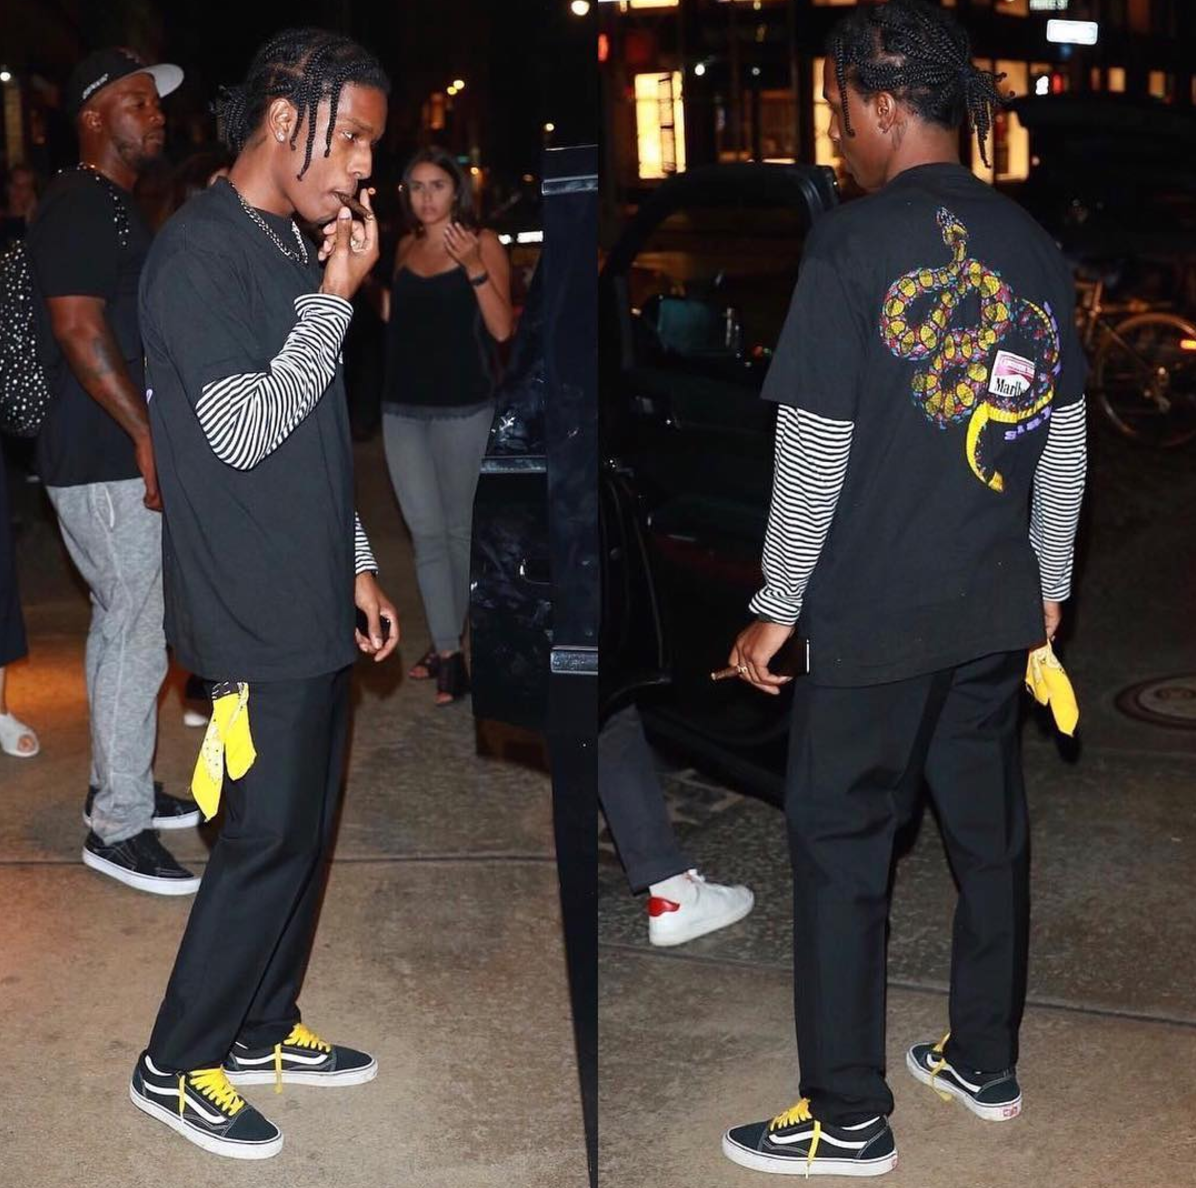 SPOTTED: A$AP Rocky In Marlboro T-Shirt And Vans Sneakers